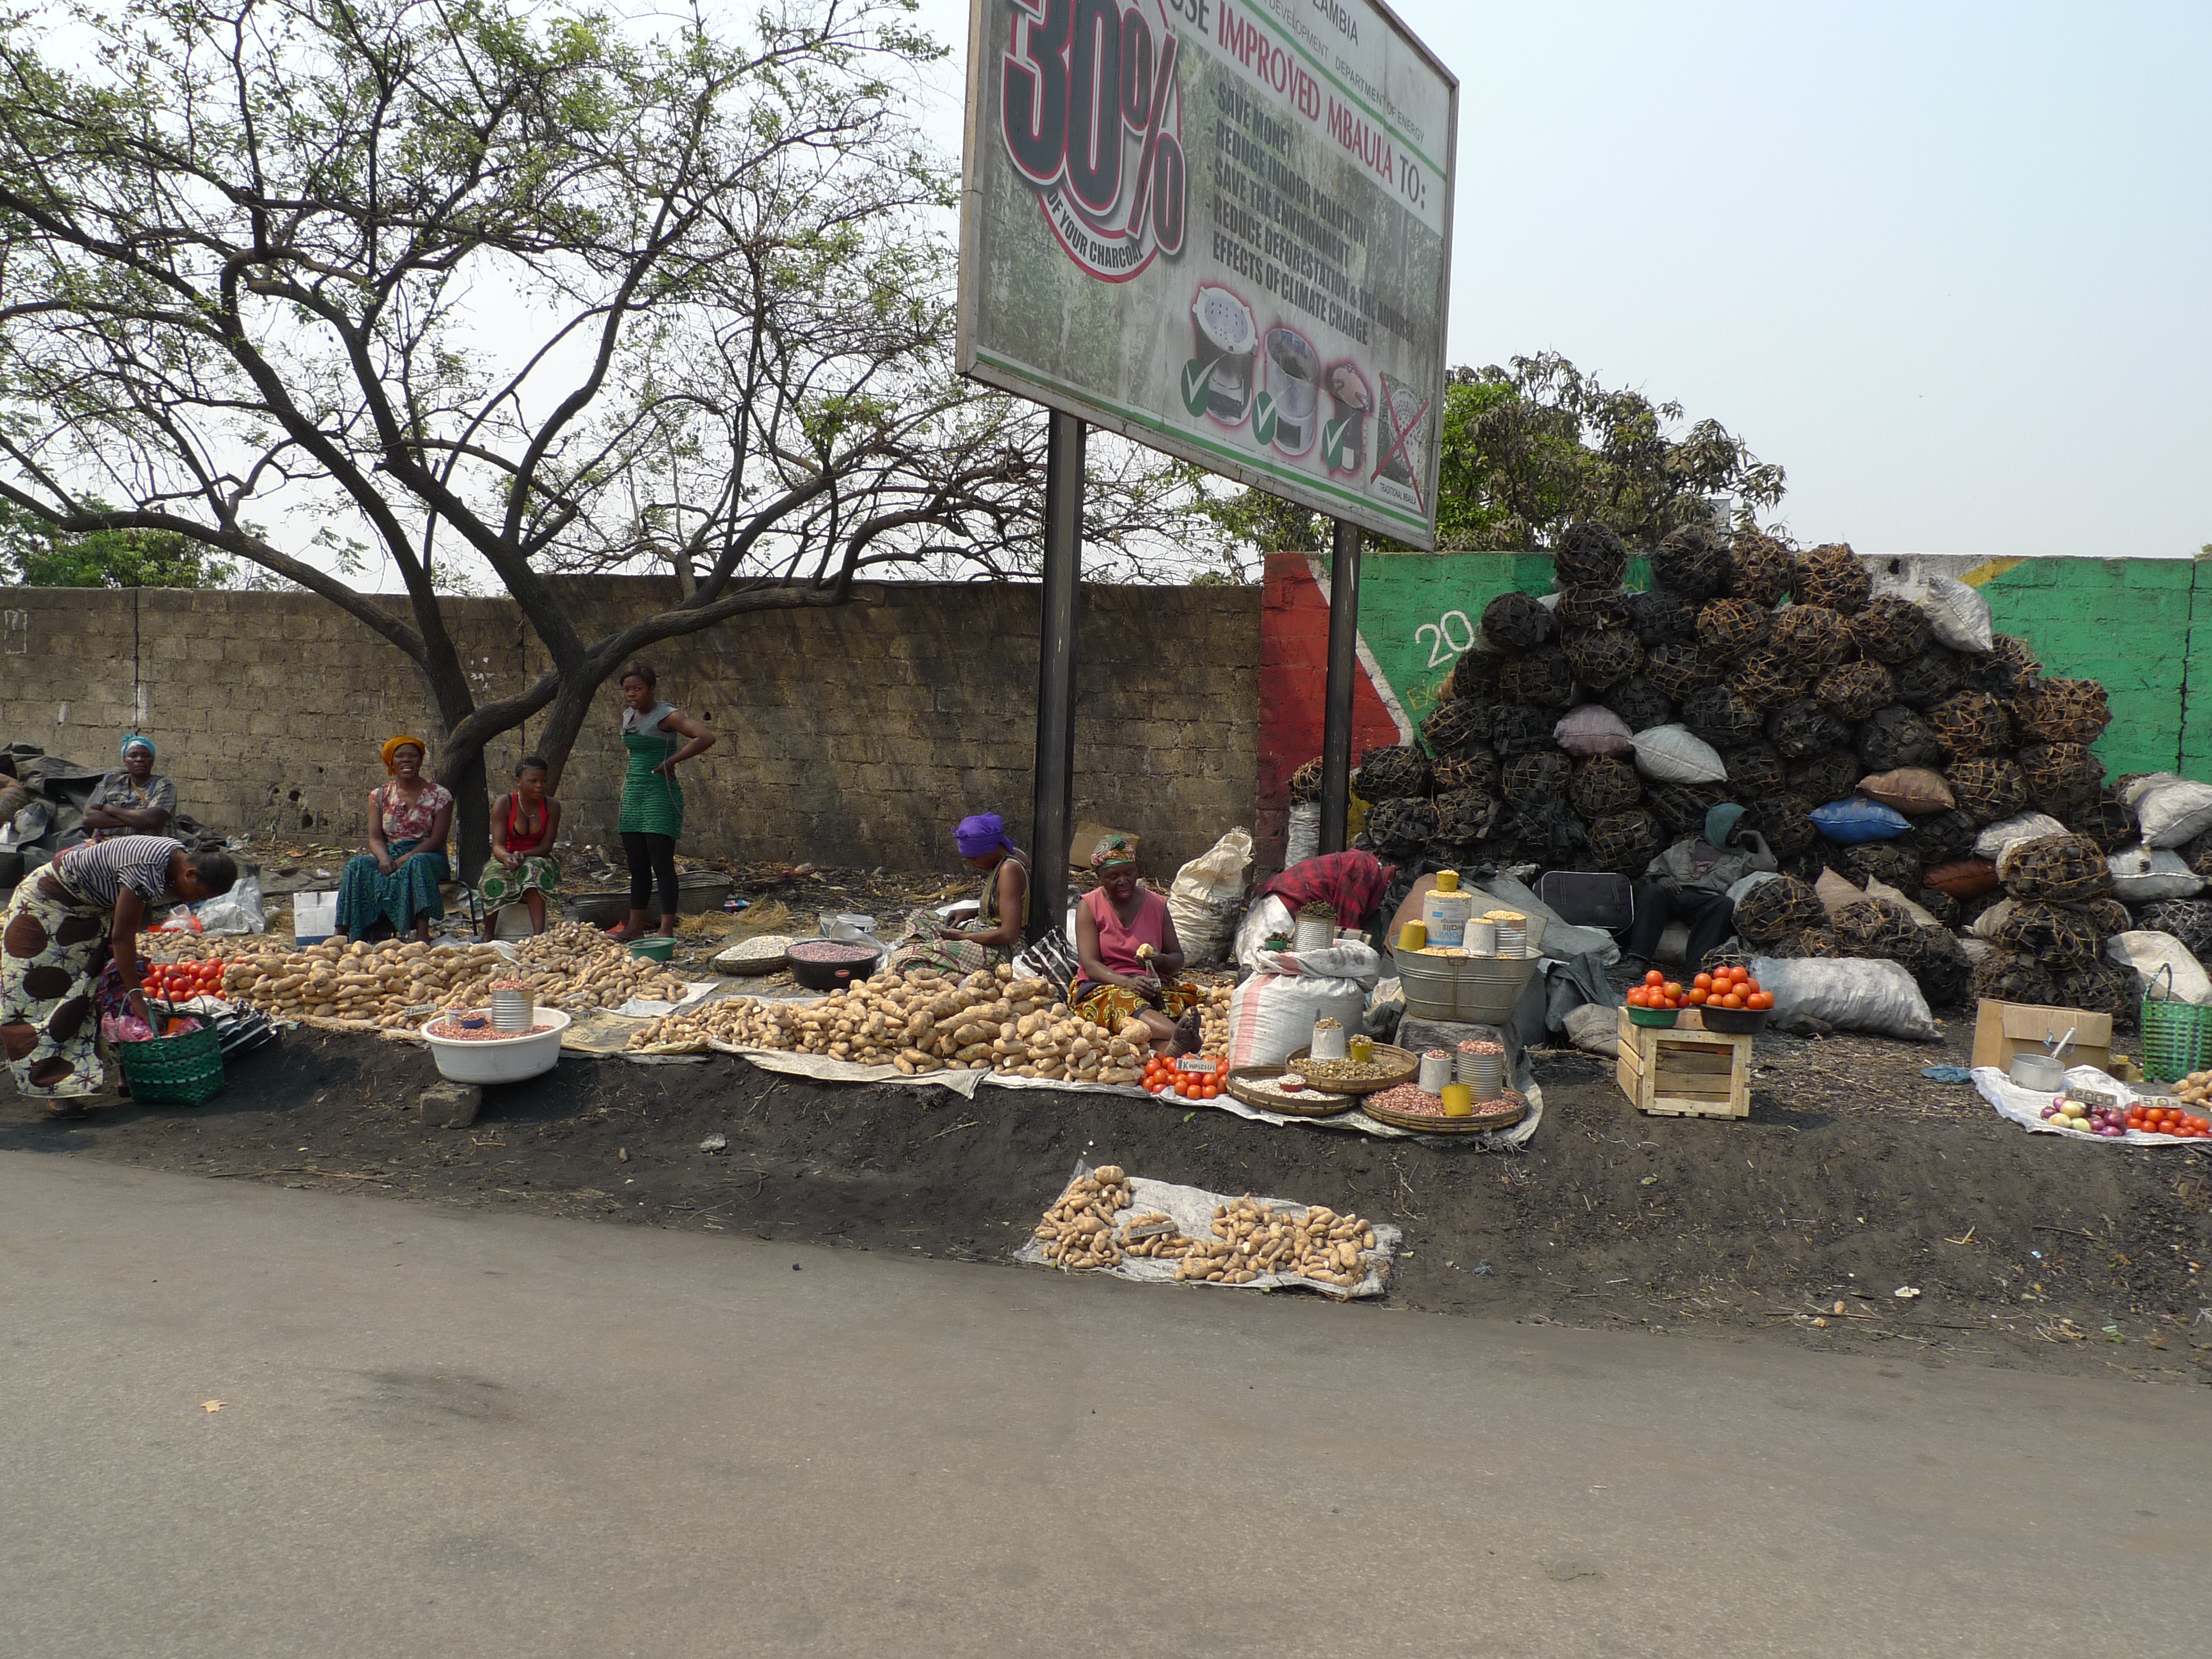 Street vendors in Zambia: The government wants to escape over-indebtedness with IMF and G20 support.